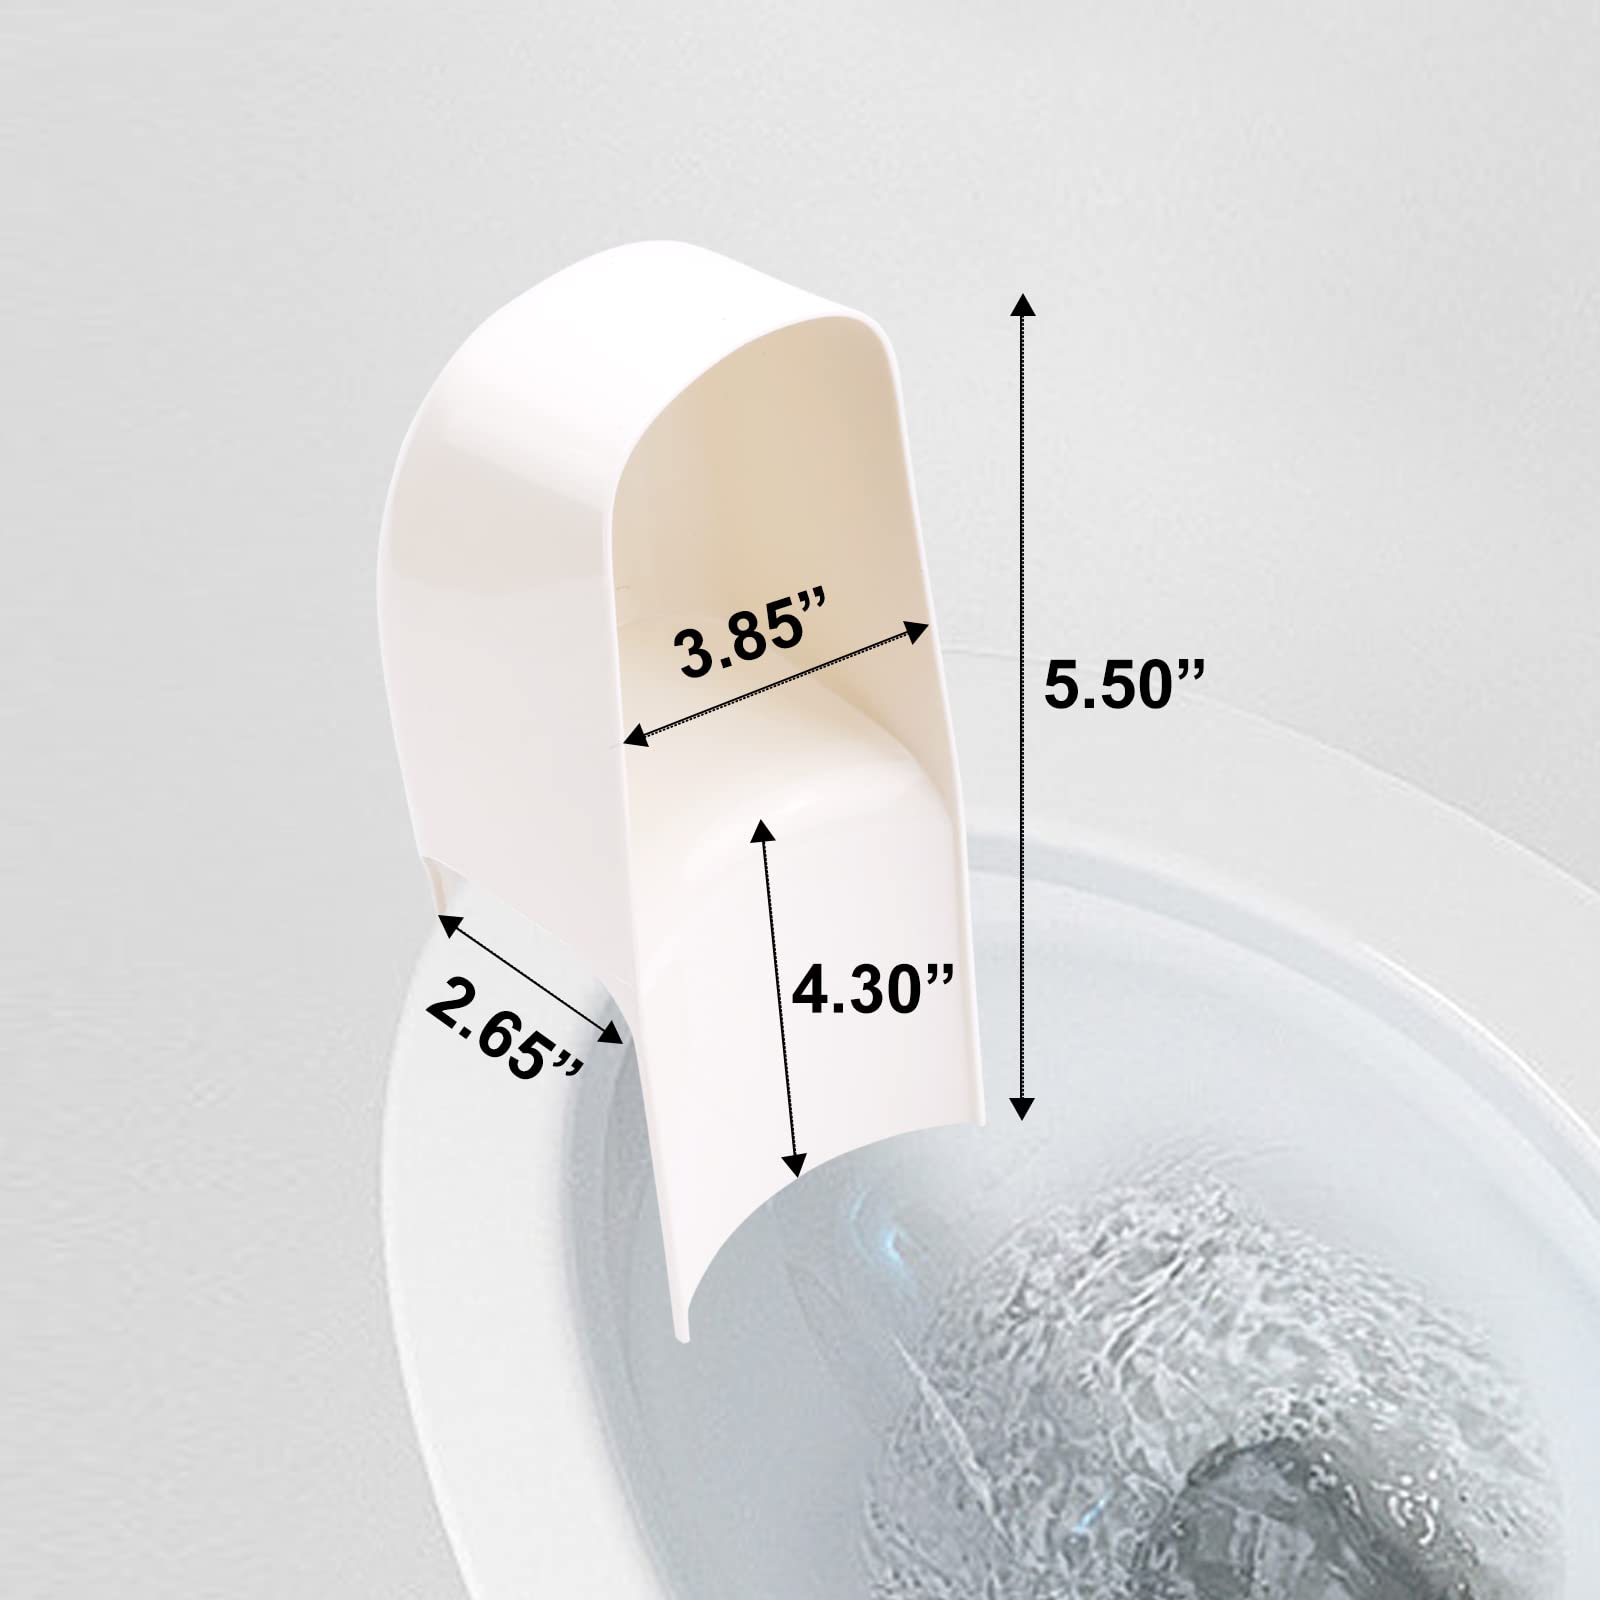 Rugam Splash Guard Toilet Seat Design for Directs Urine Home Care Disability Elevated Fits Most Toilet Seats - measures 14.0 x 6.0 x 4.0 inches White